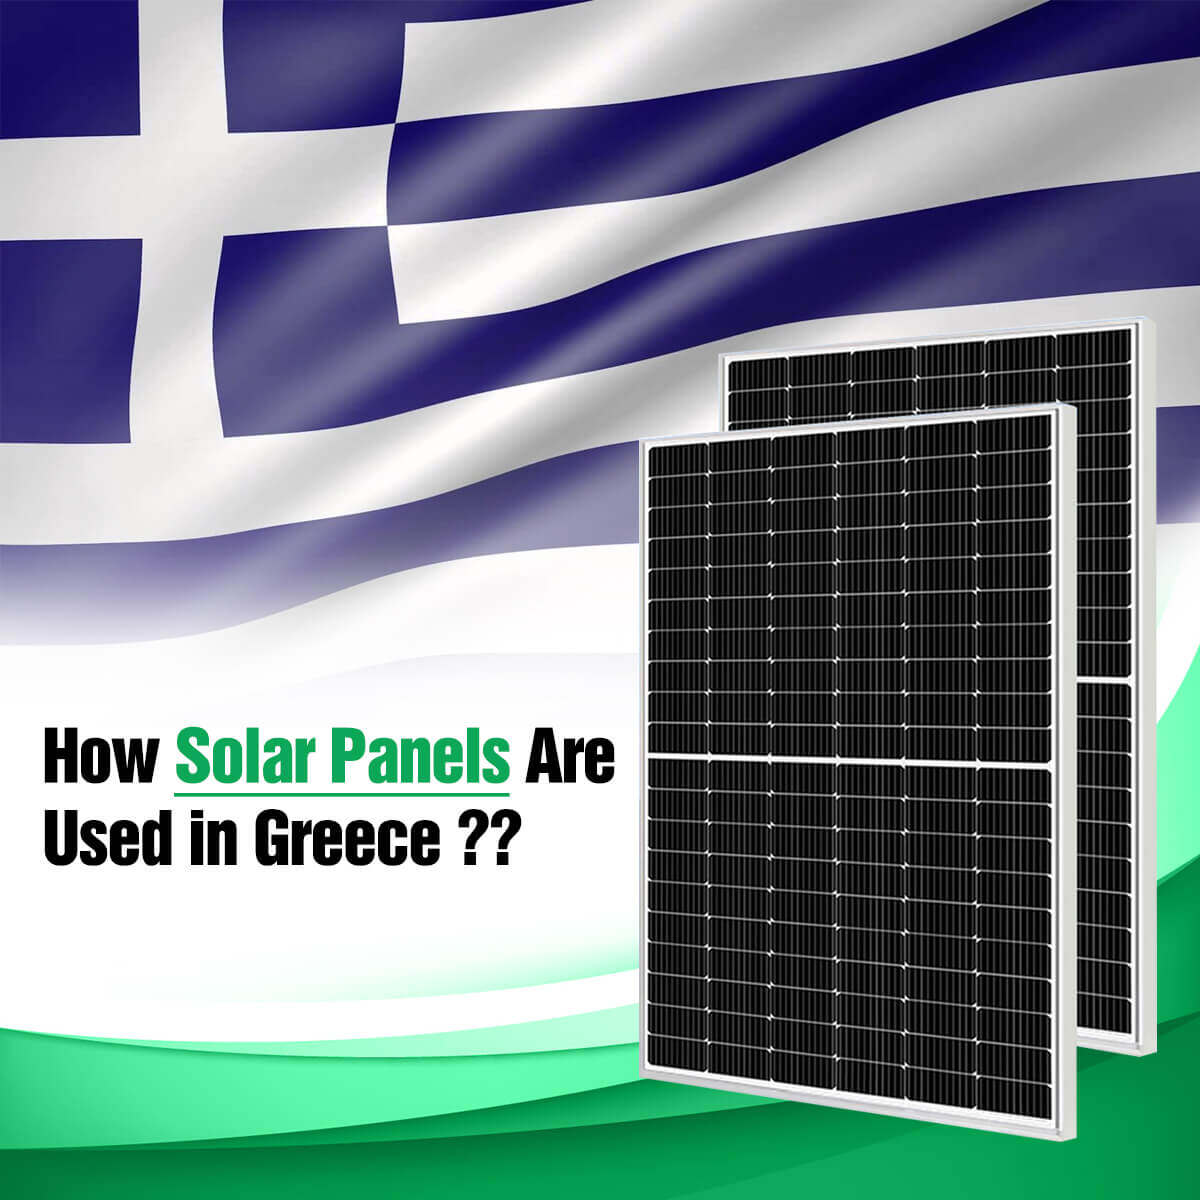 How Solar Panels Are Used in Greece